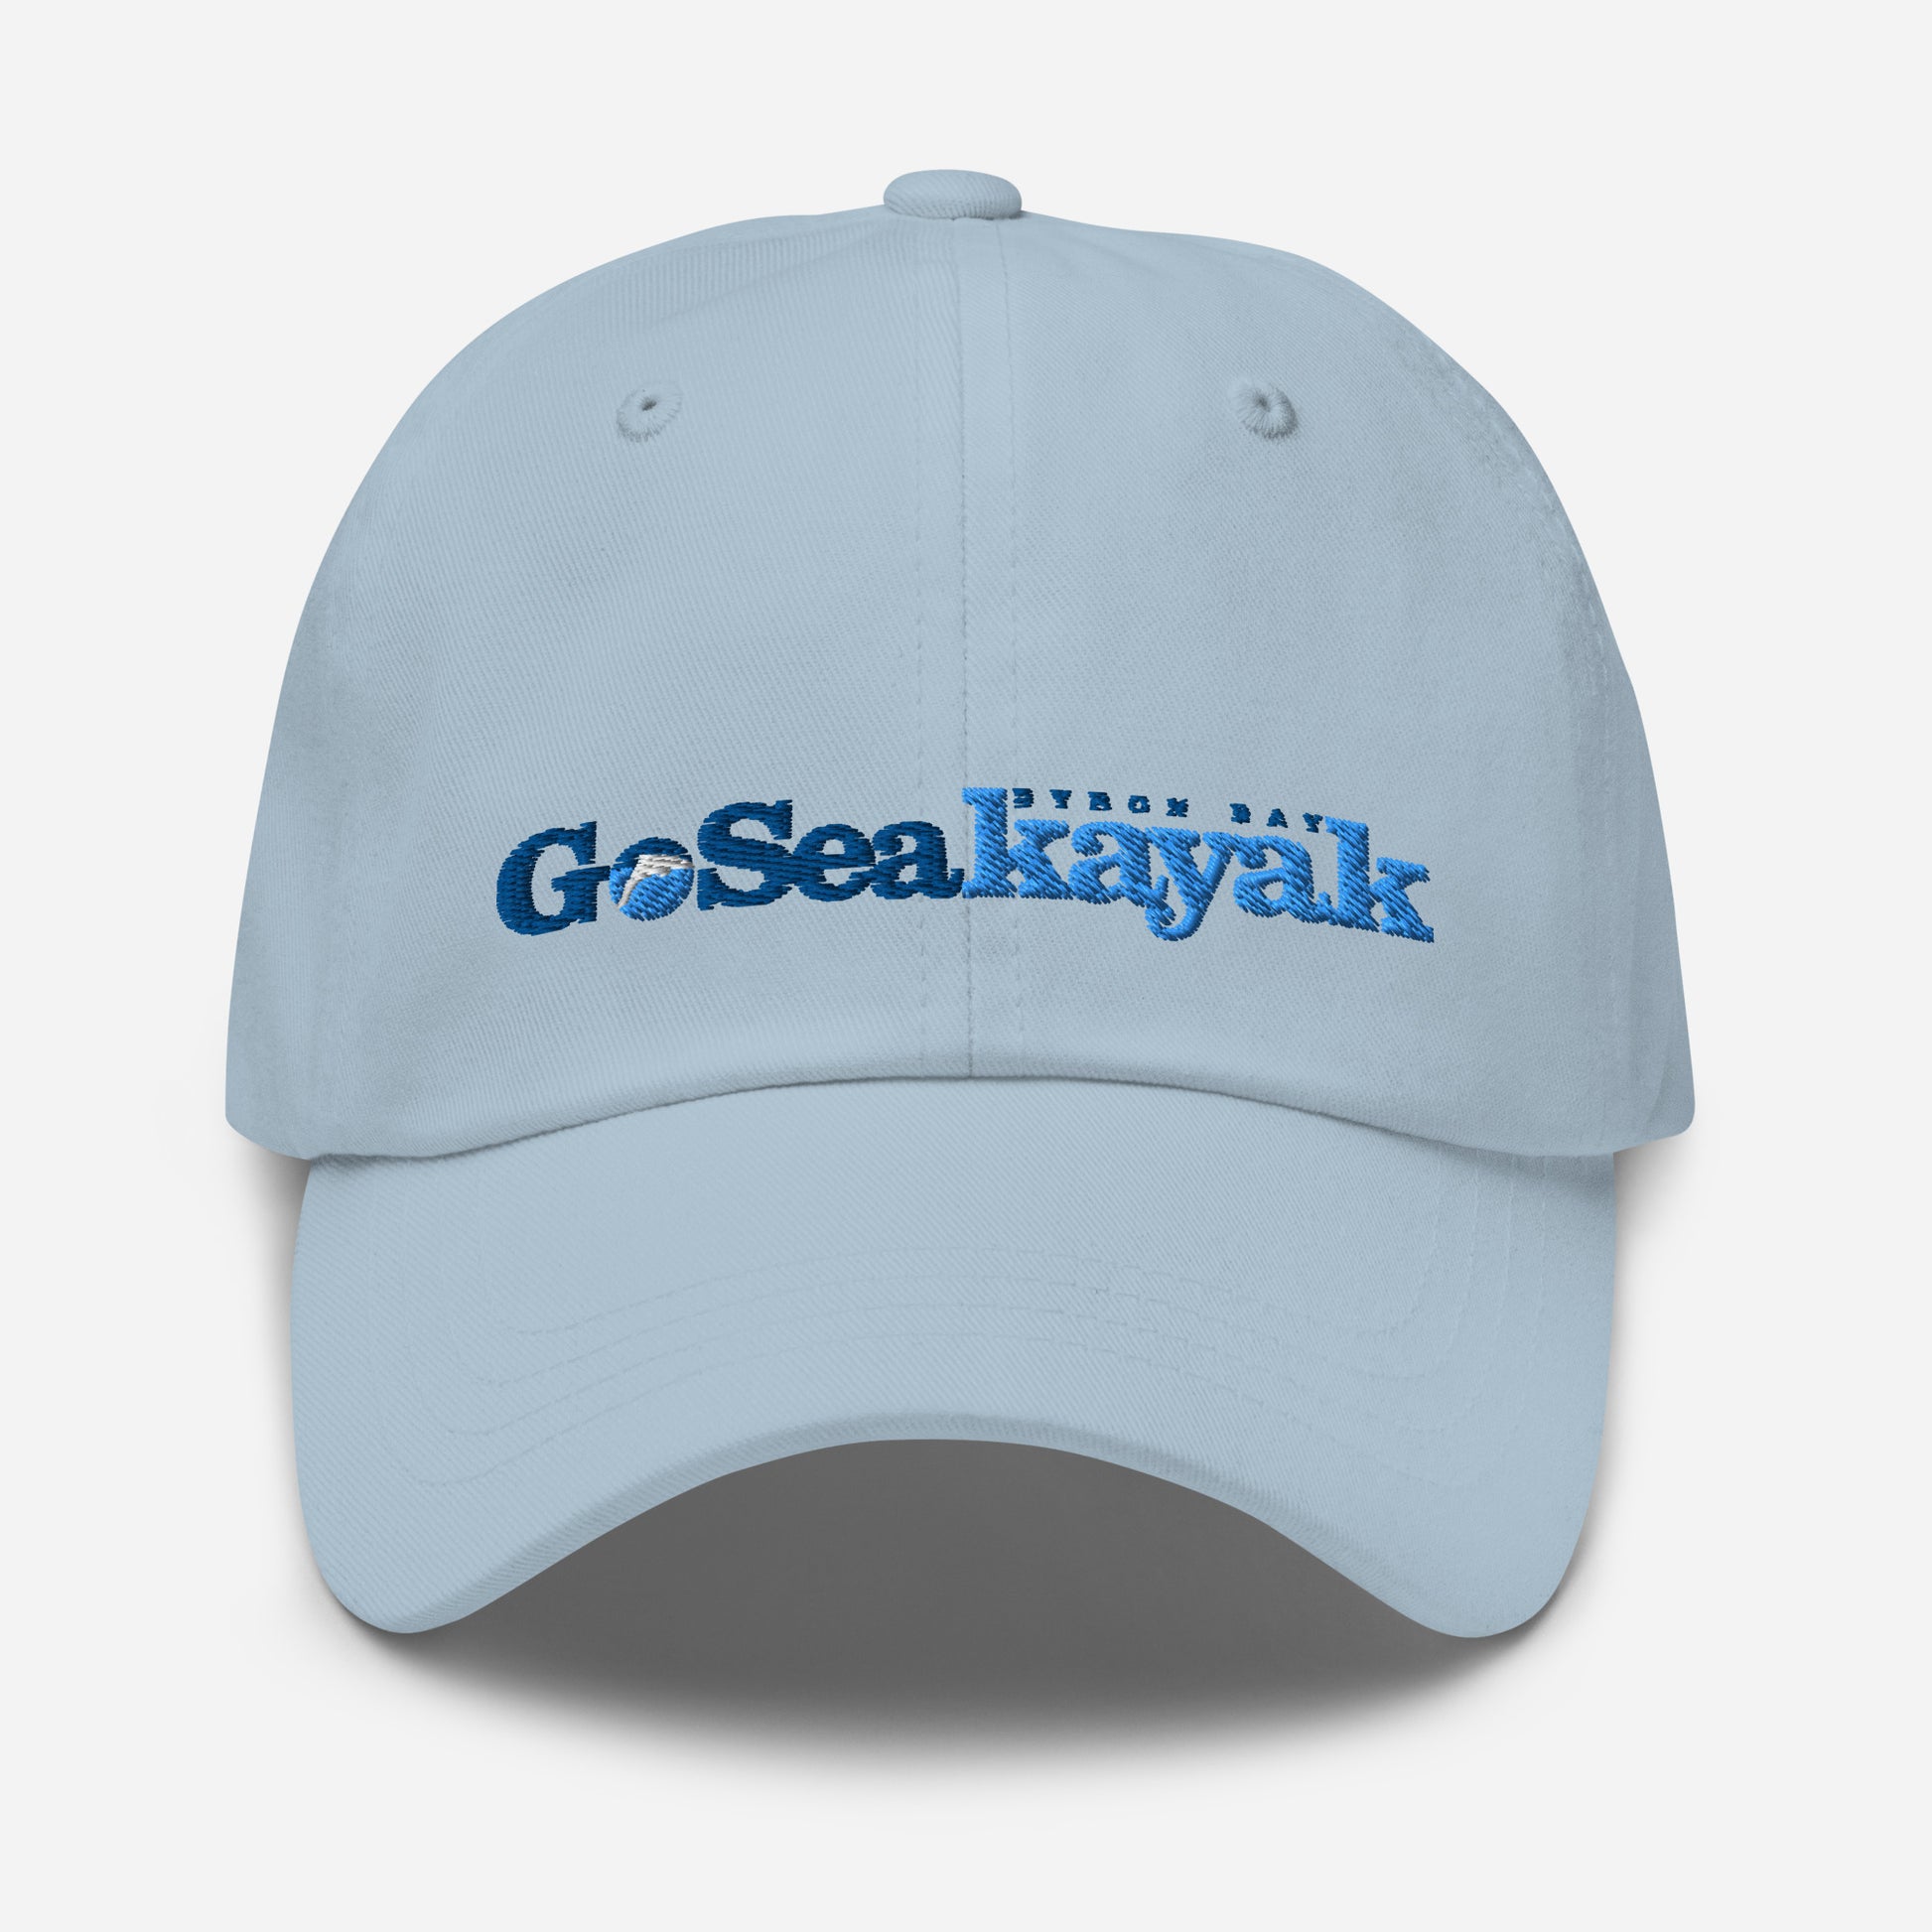  Unisex Cap - Light Blue - Front view - Go Sea Kayak logo on front  - Genuine Byron Bay Merchandise | Produced by Go Sea Kayak Byron Bay